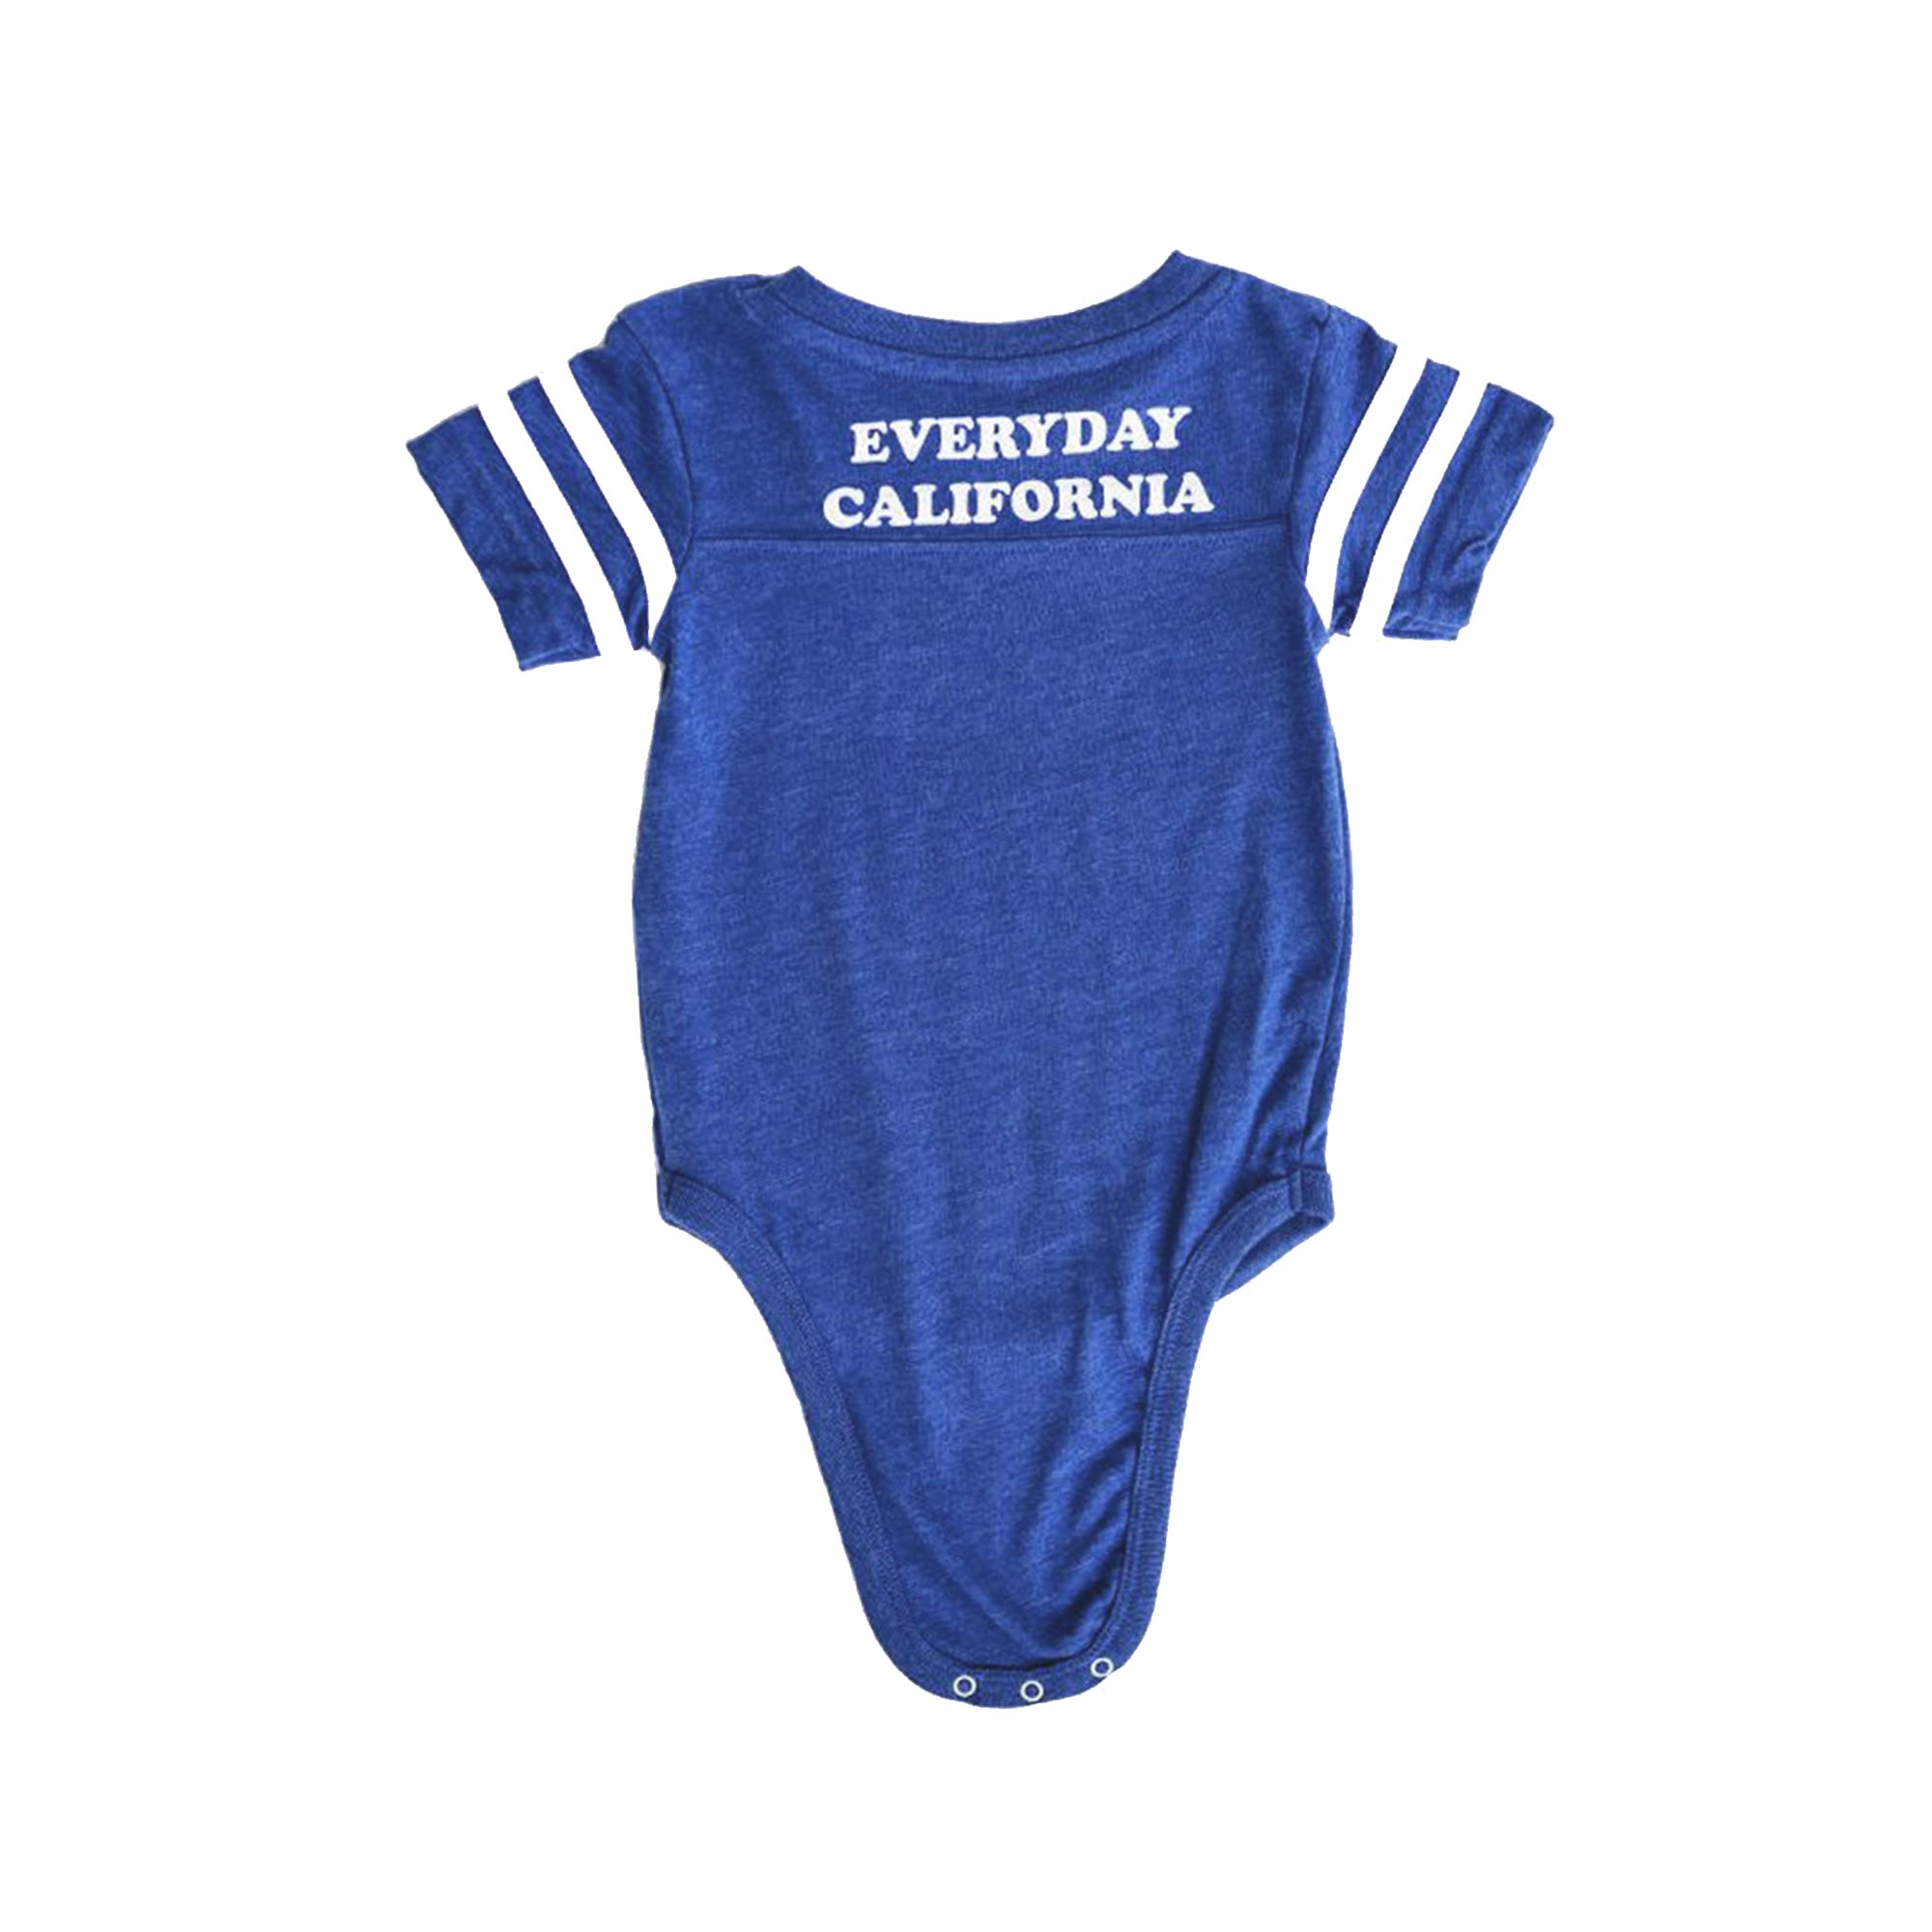 Everyday California Brutus Onesie - blue baby onesie with Brutus logo on the front and Everyday California print on the back.